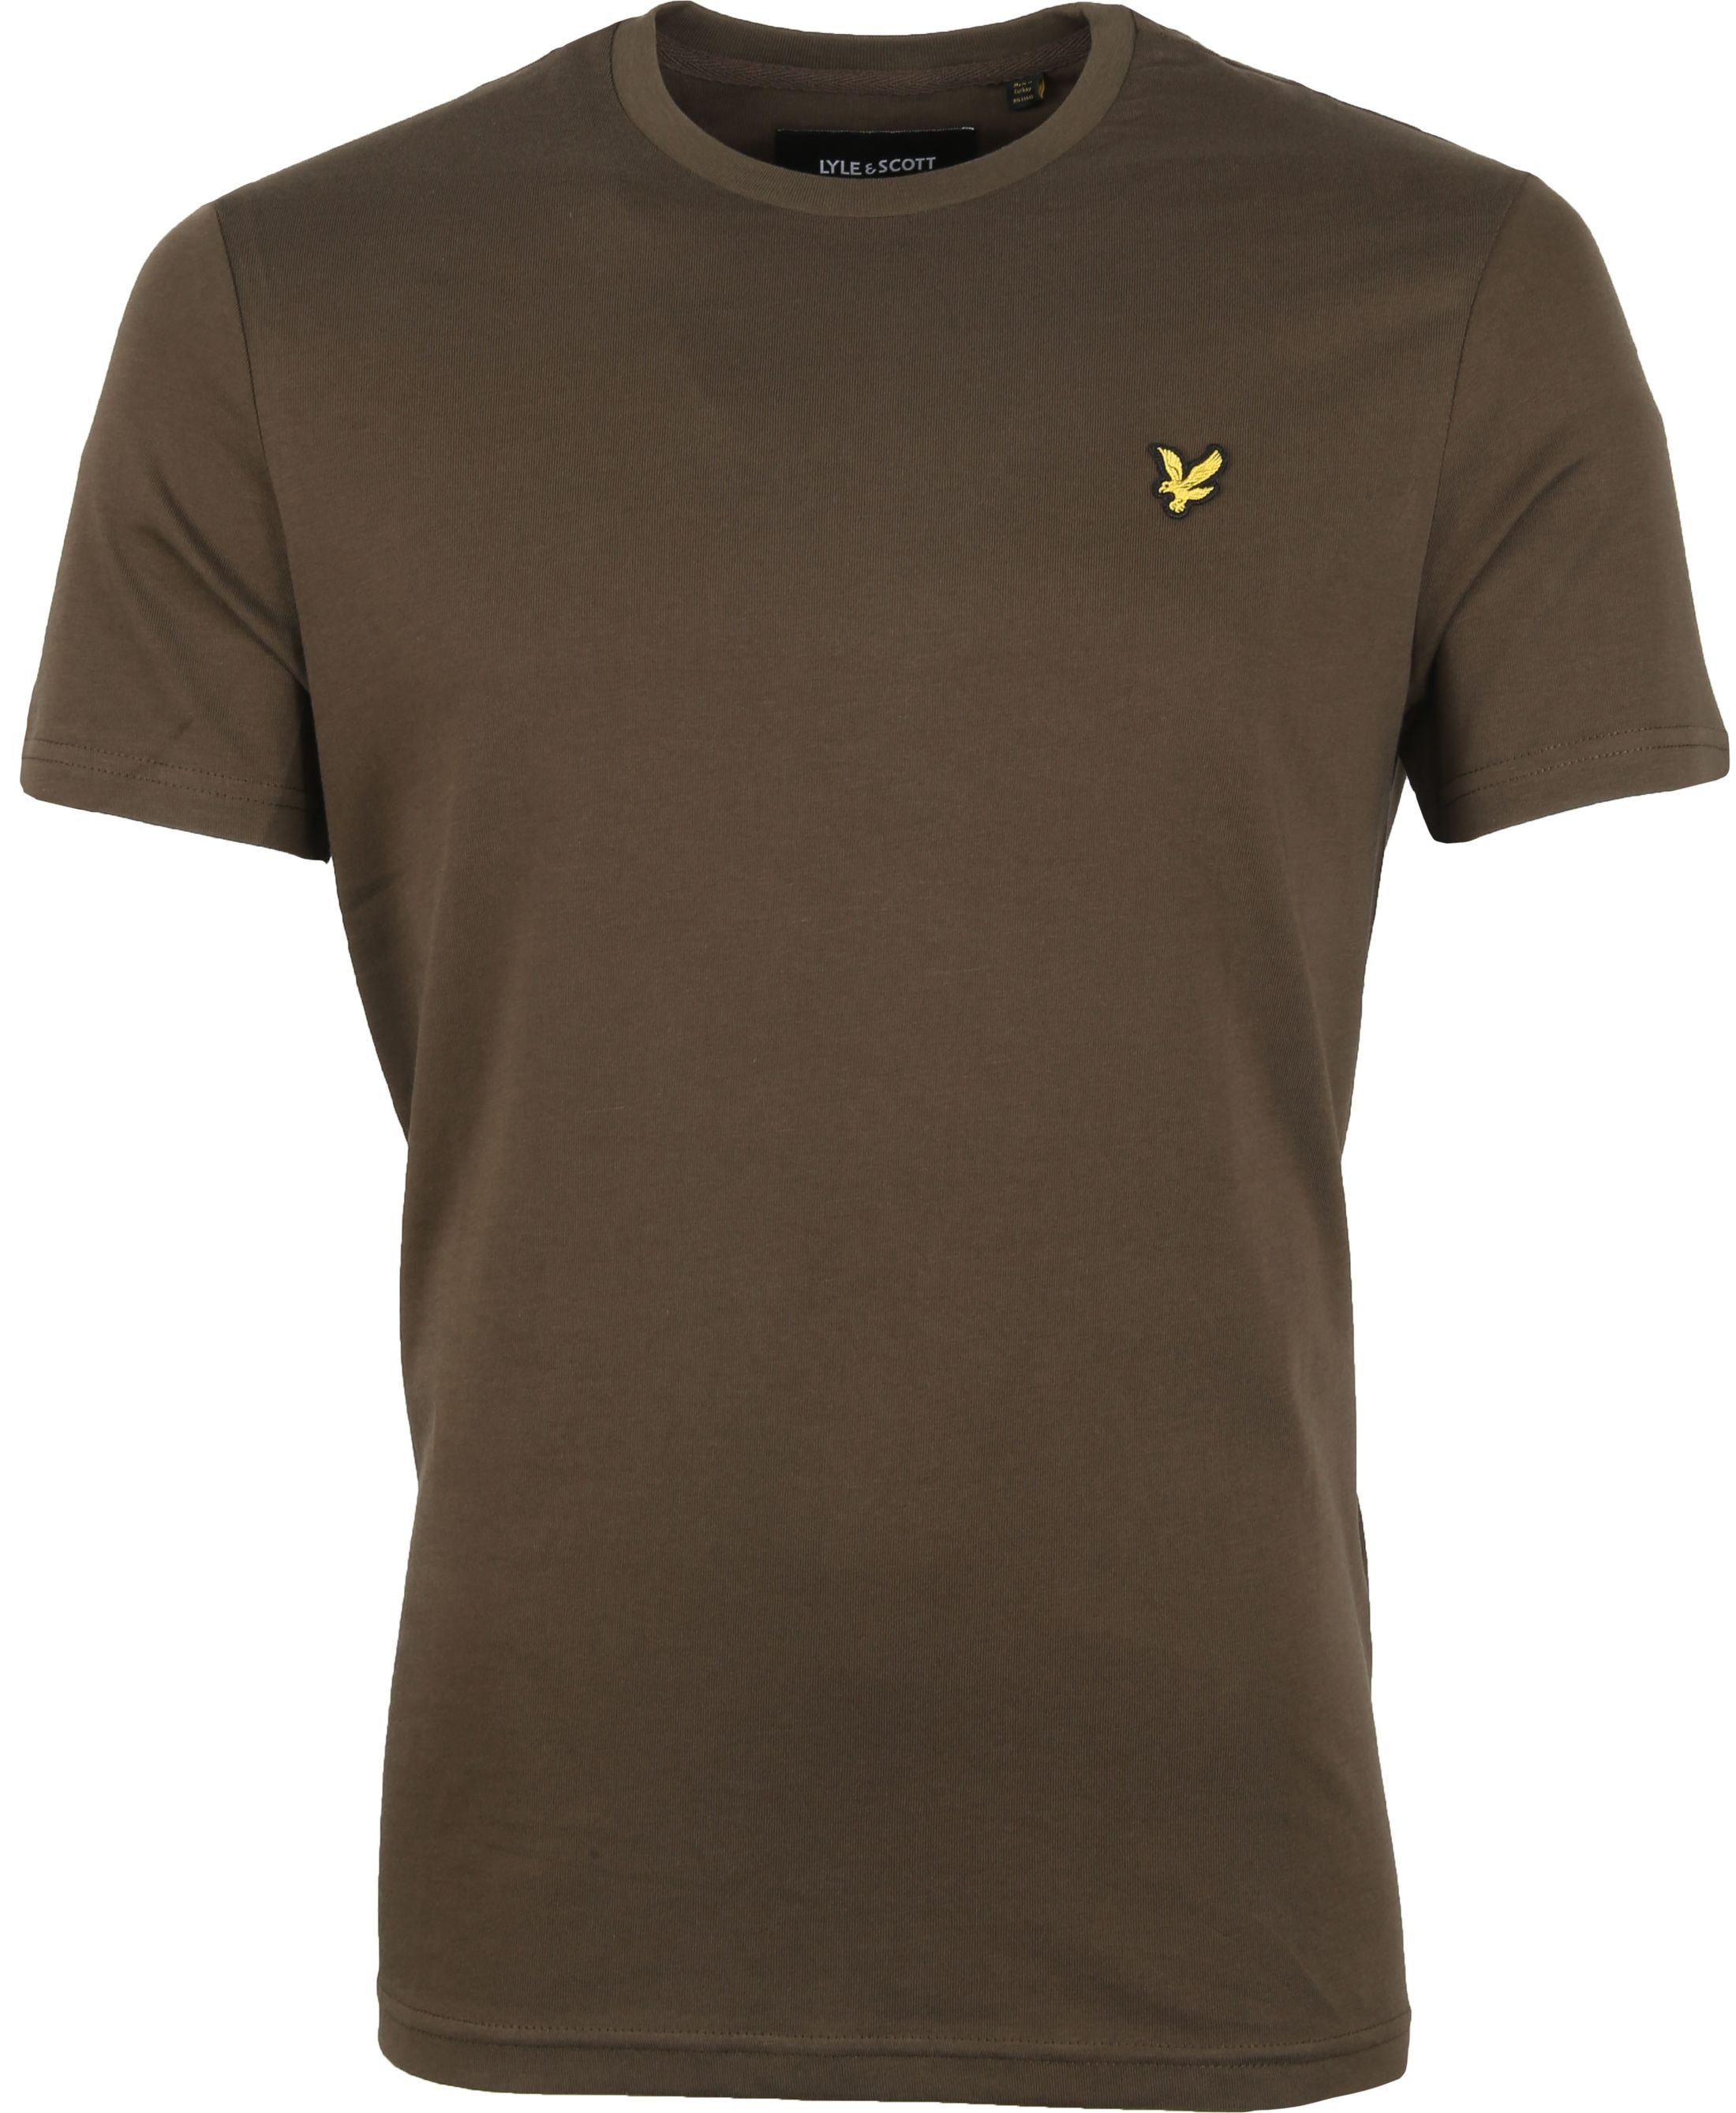 Lyle and Scott T Shirt Olive Green Dark Green size S